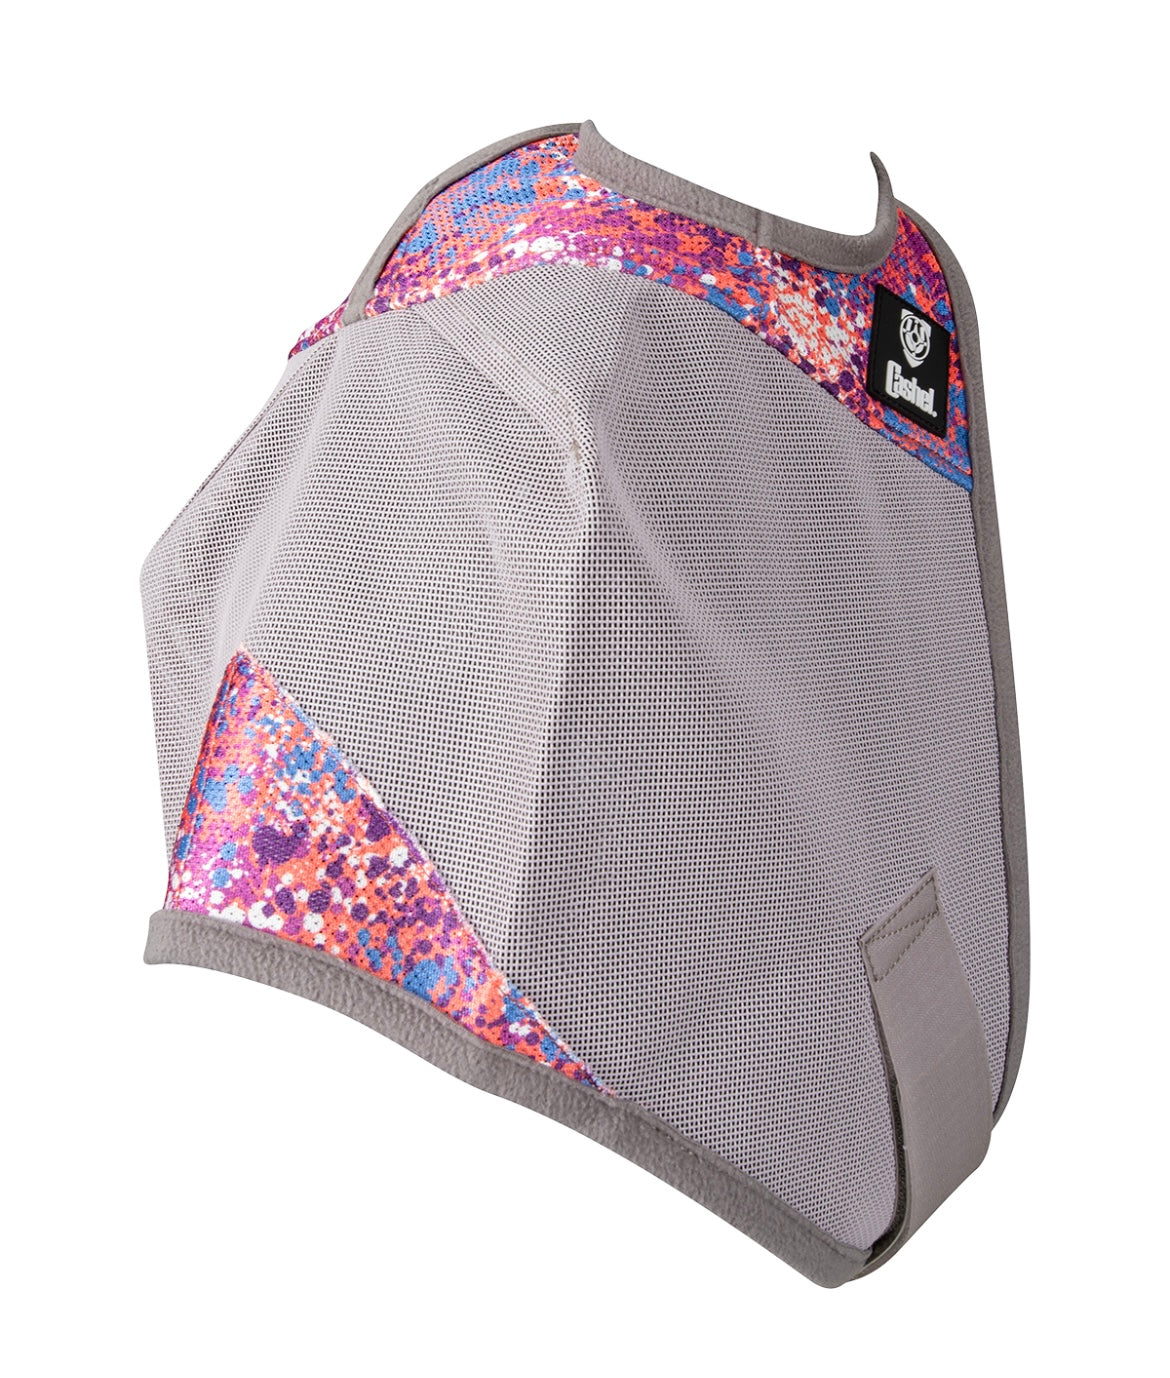 Cashel Crusader Fly Mask With UV Protection